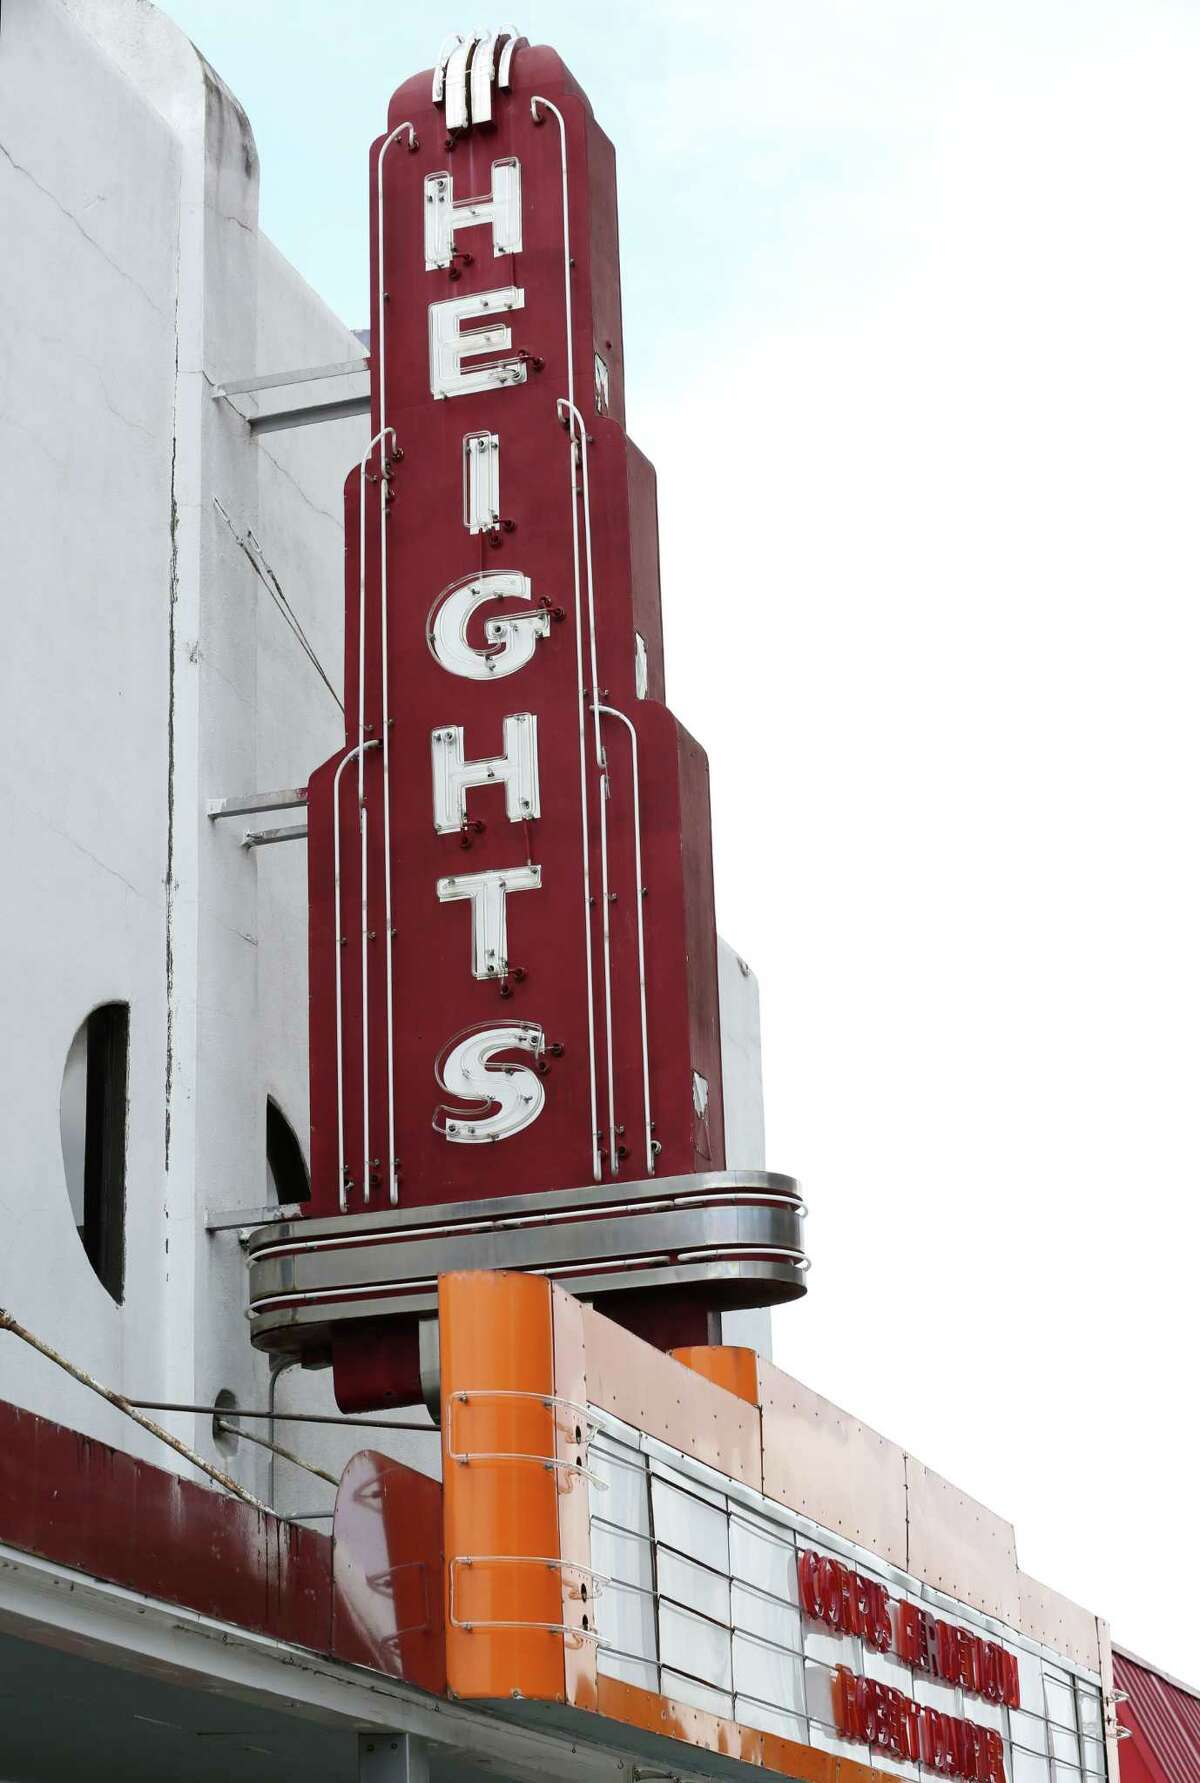 The former Heights Theater is seen Wednesday, July 22, 2015, in Houston. The building at 308 Main St. and the former Heights Theater at 339 W. 19th St. were designated landmarks by the City of Houston. ( Jon Shapley / Houston Chronicle )